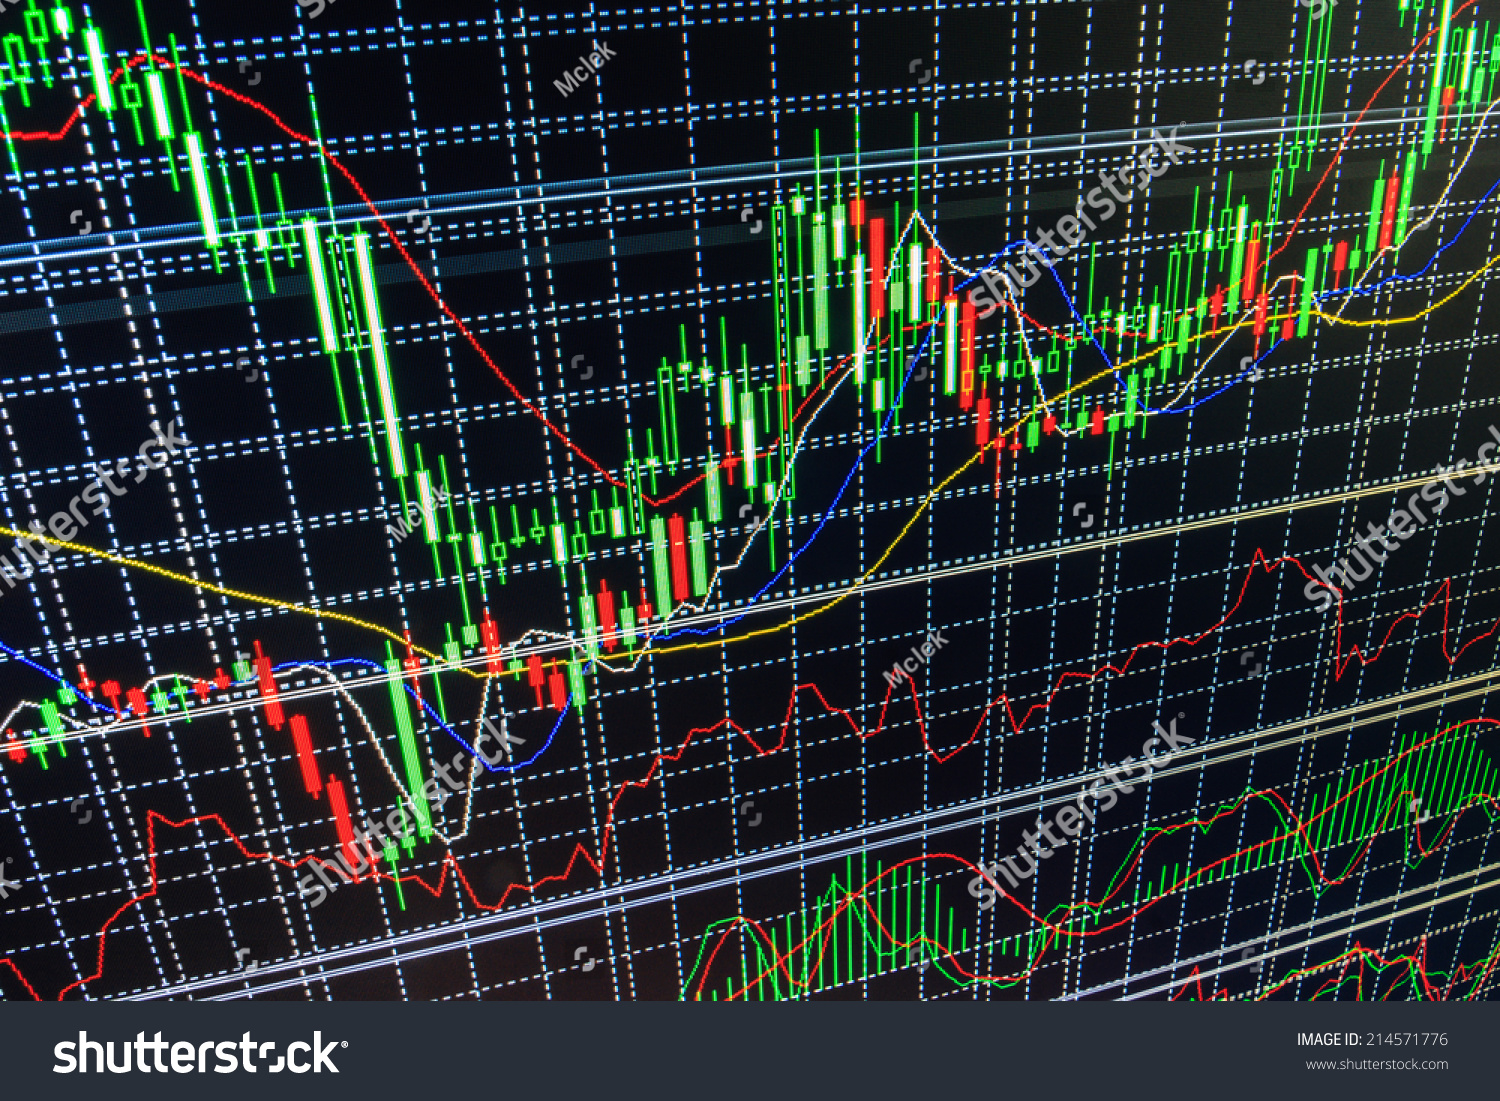 stock-photo-financial-chart-as-background-currency-exchange-forex-trade-screen-data-concept-online-live-214571776.jpg